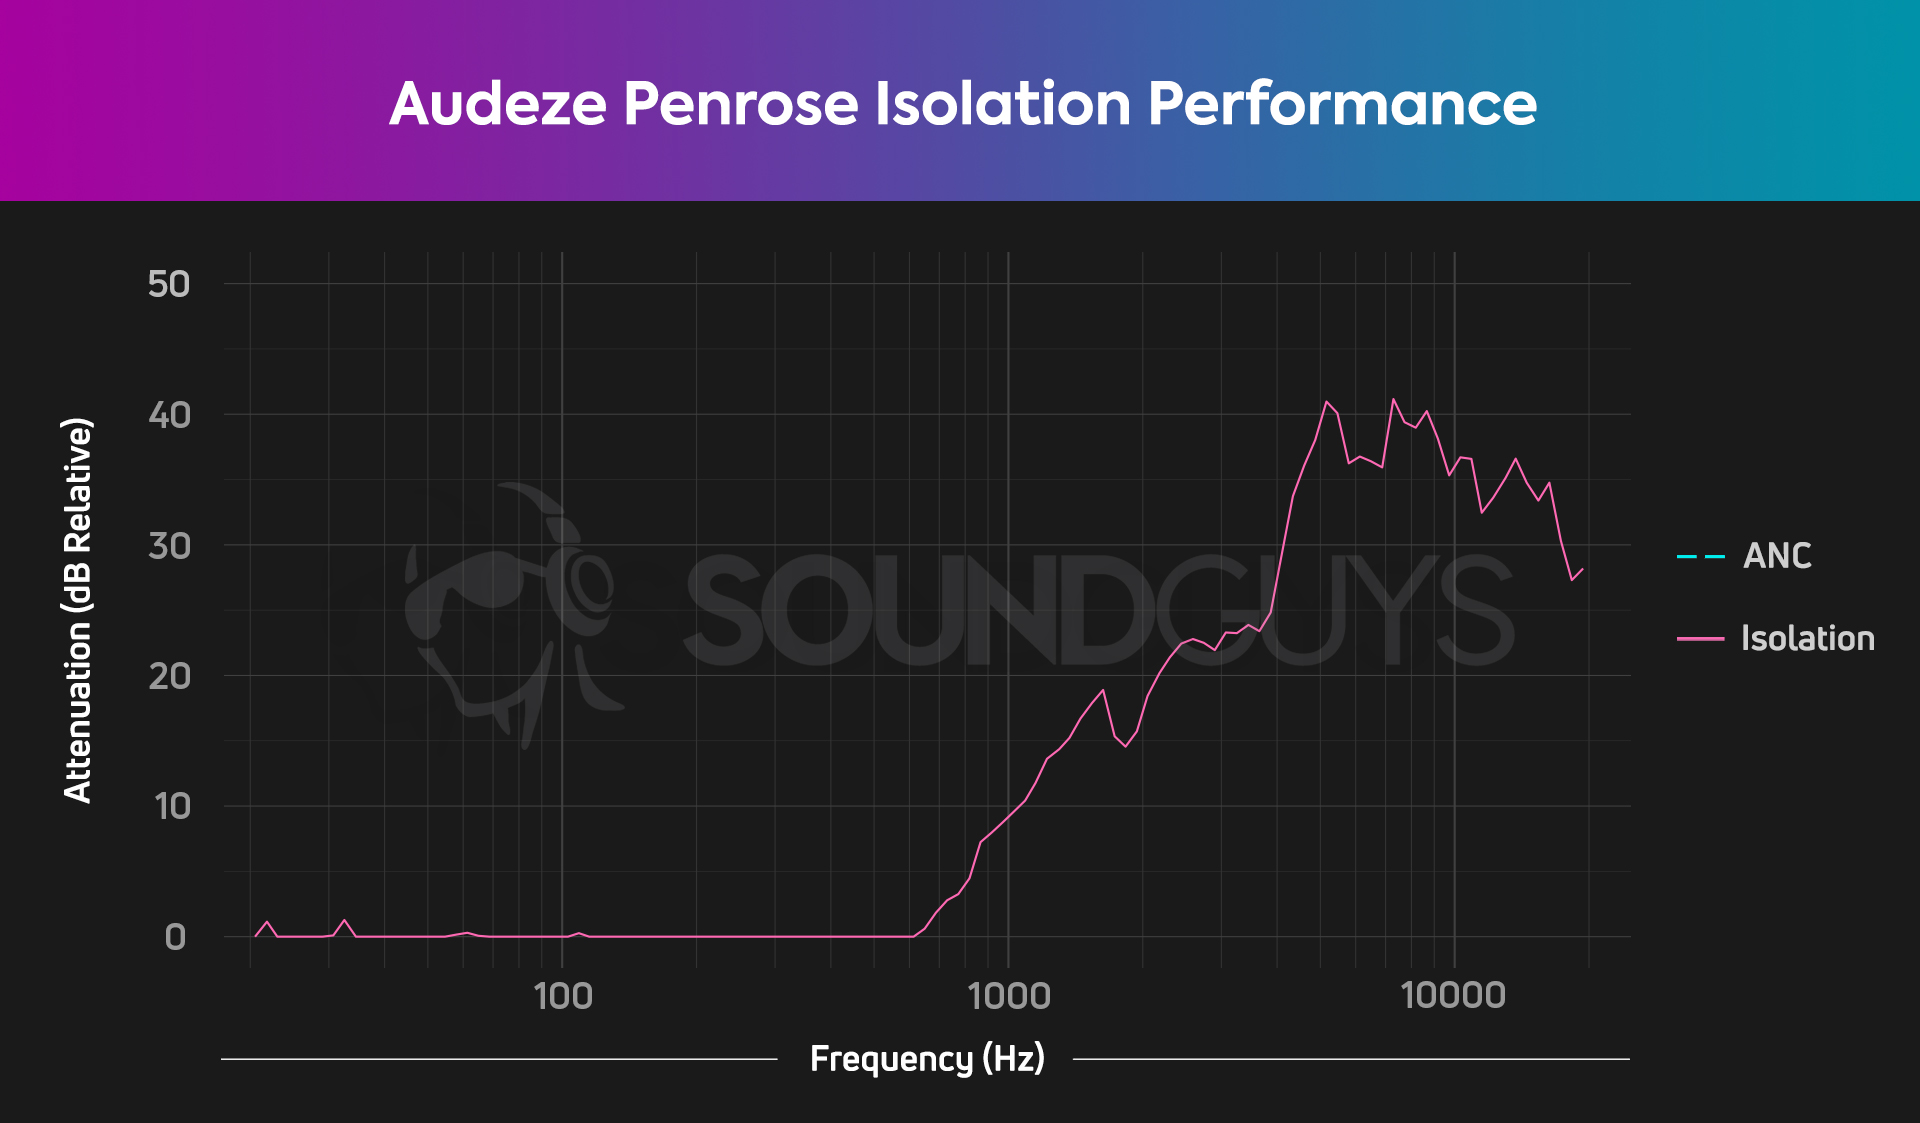 An isolation chart for the Audeze Penrose gaming headset, which shows good high-end attenuation.